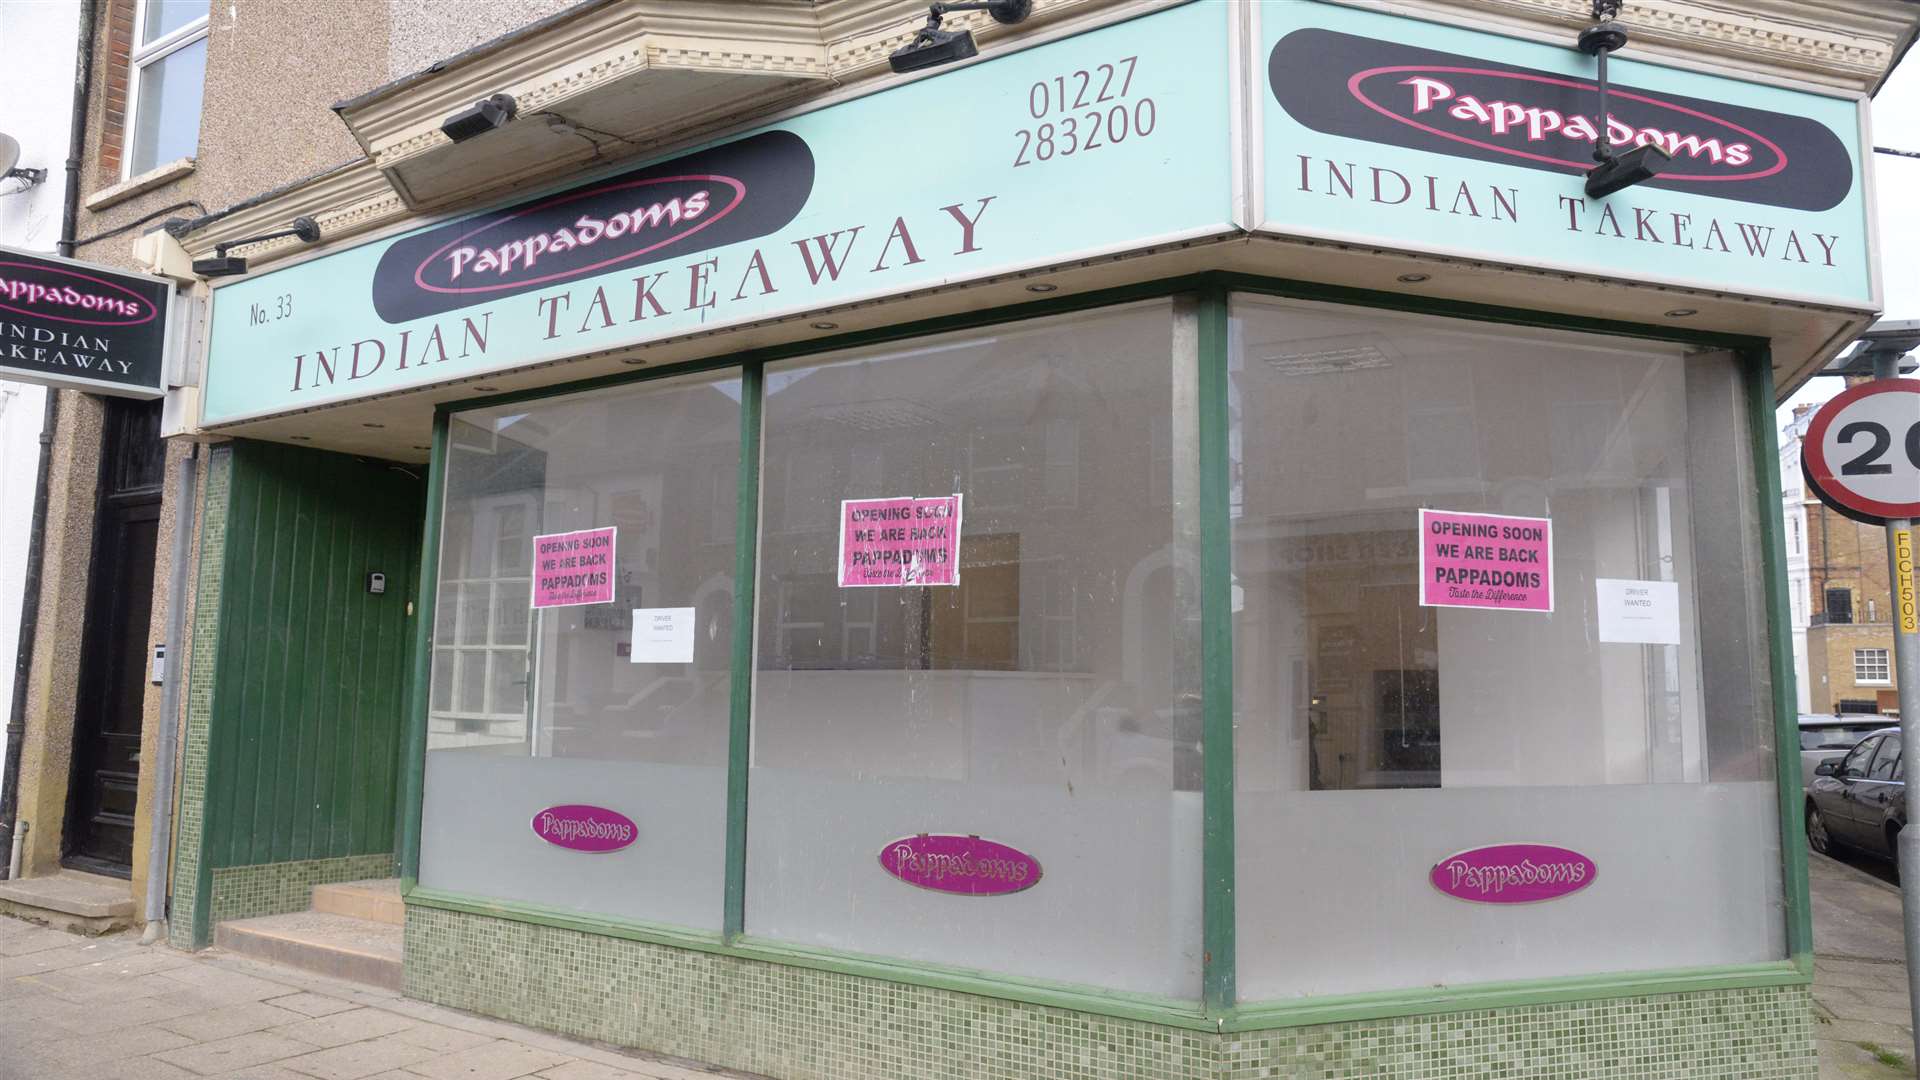 Pappadoms Indian has reopened